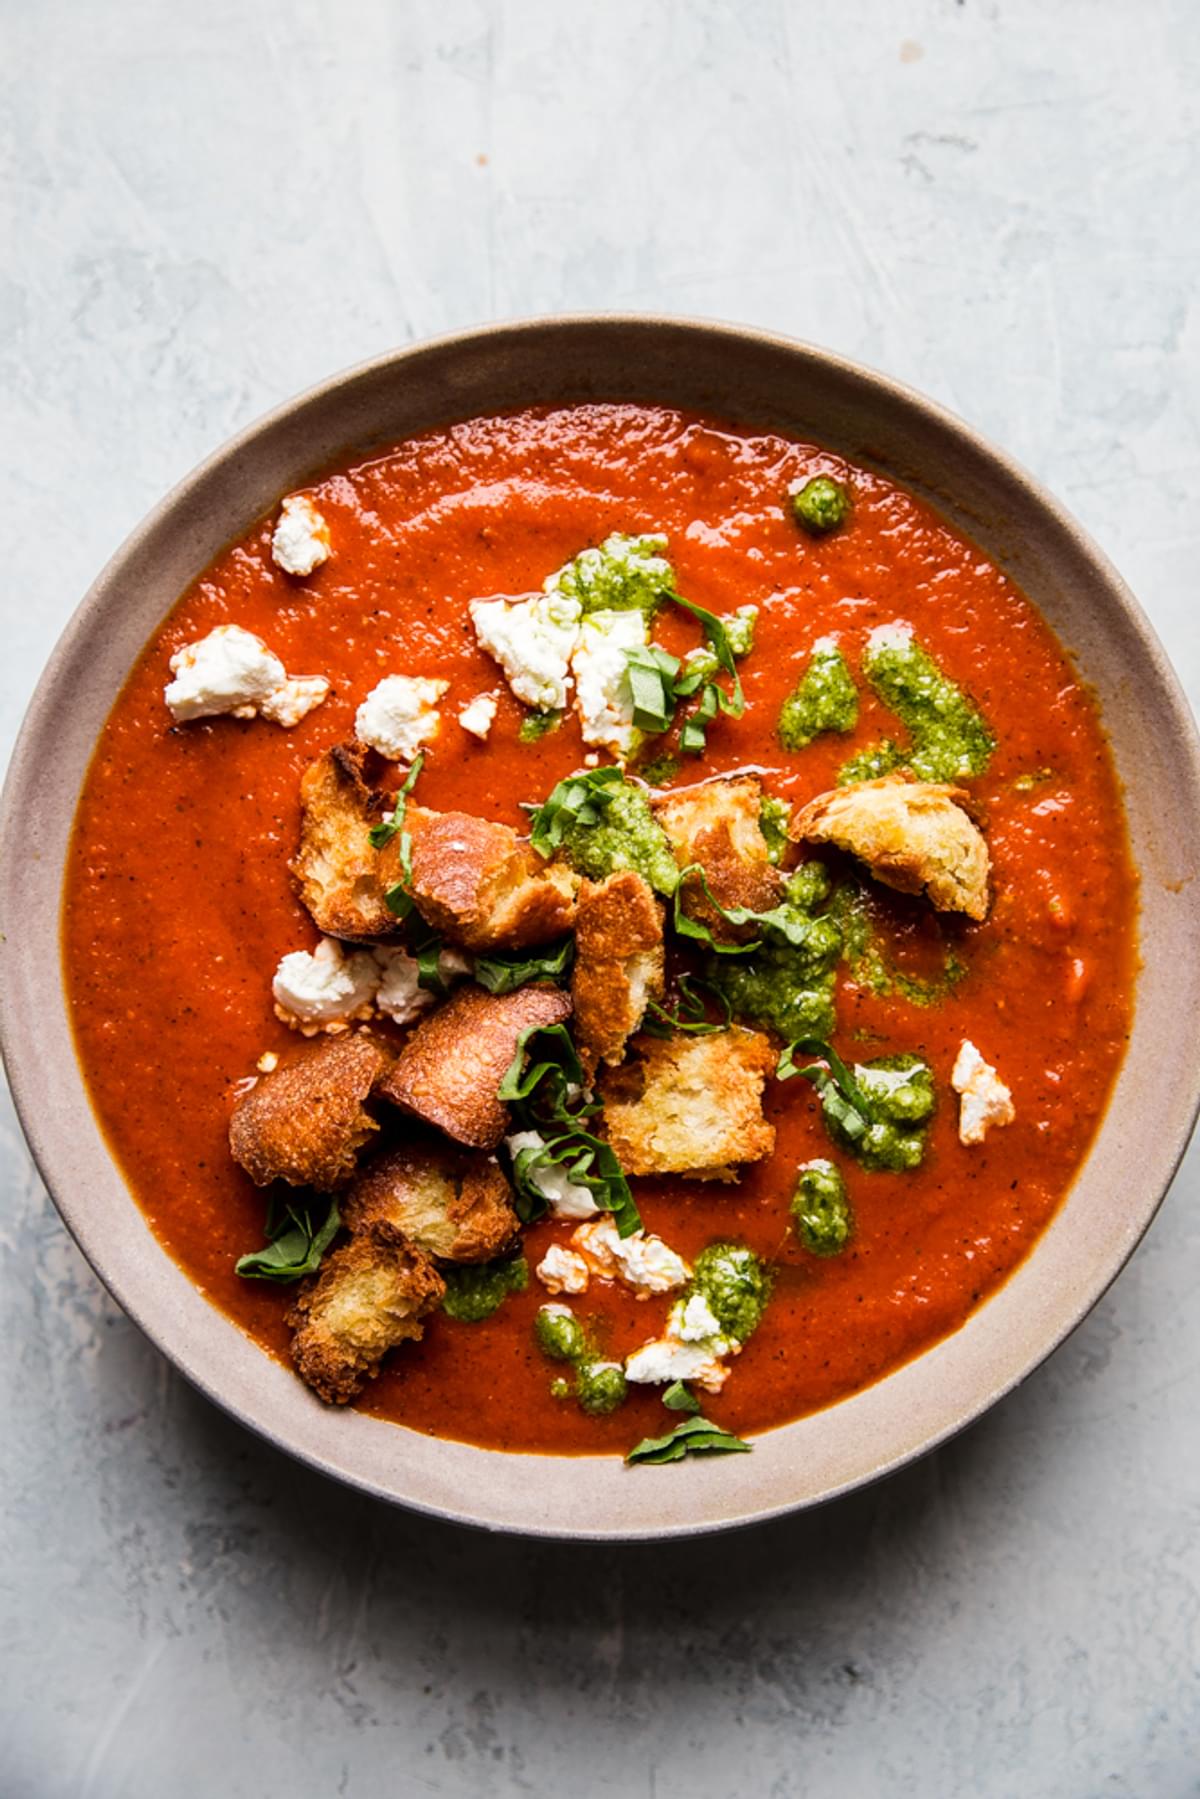 Roasted red pepper soup in a bowl with croutons, goat cheese and pesto